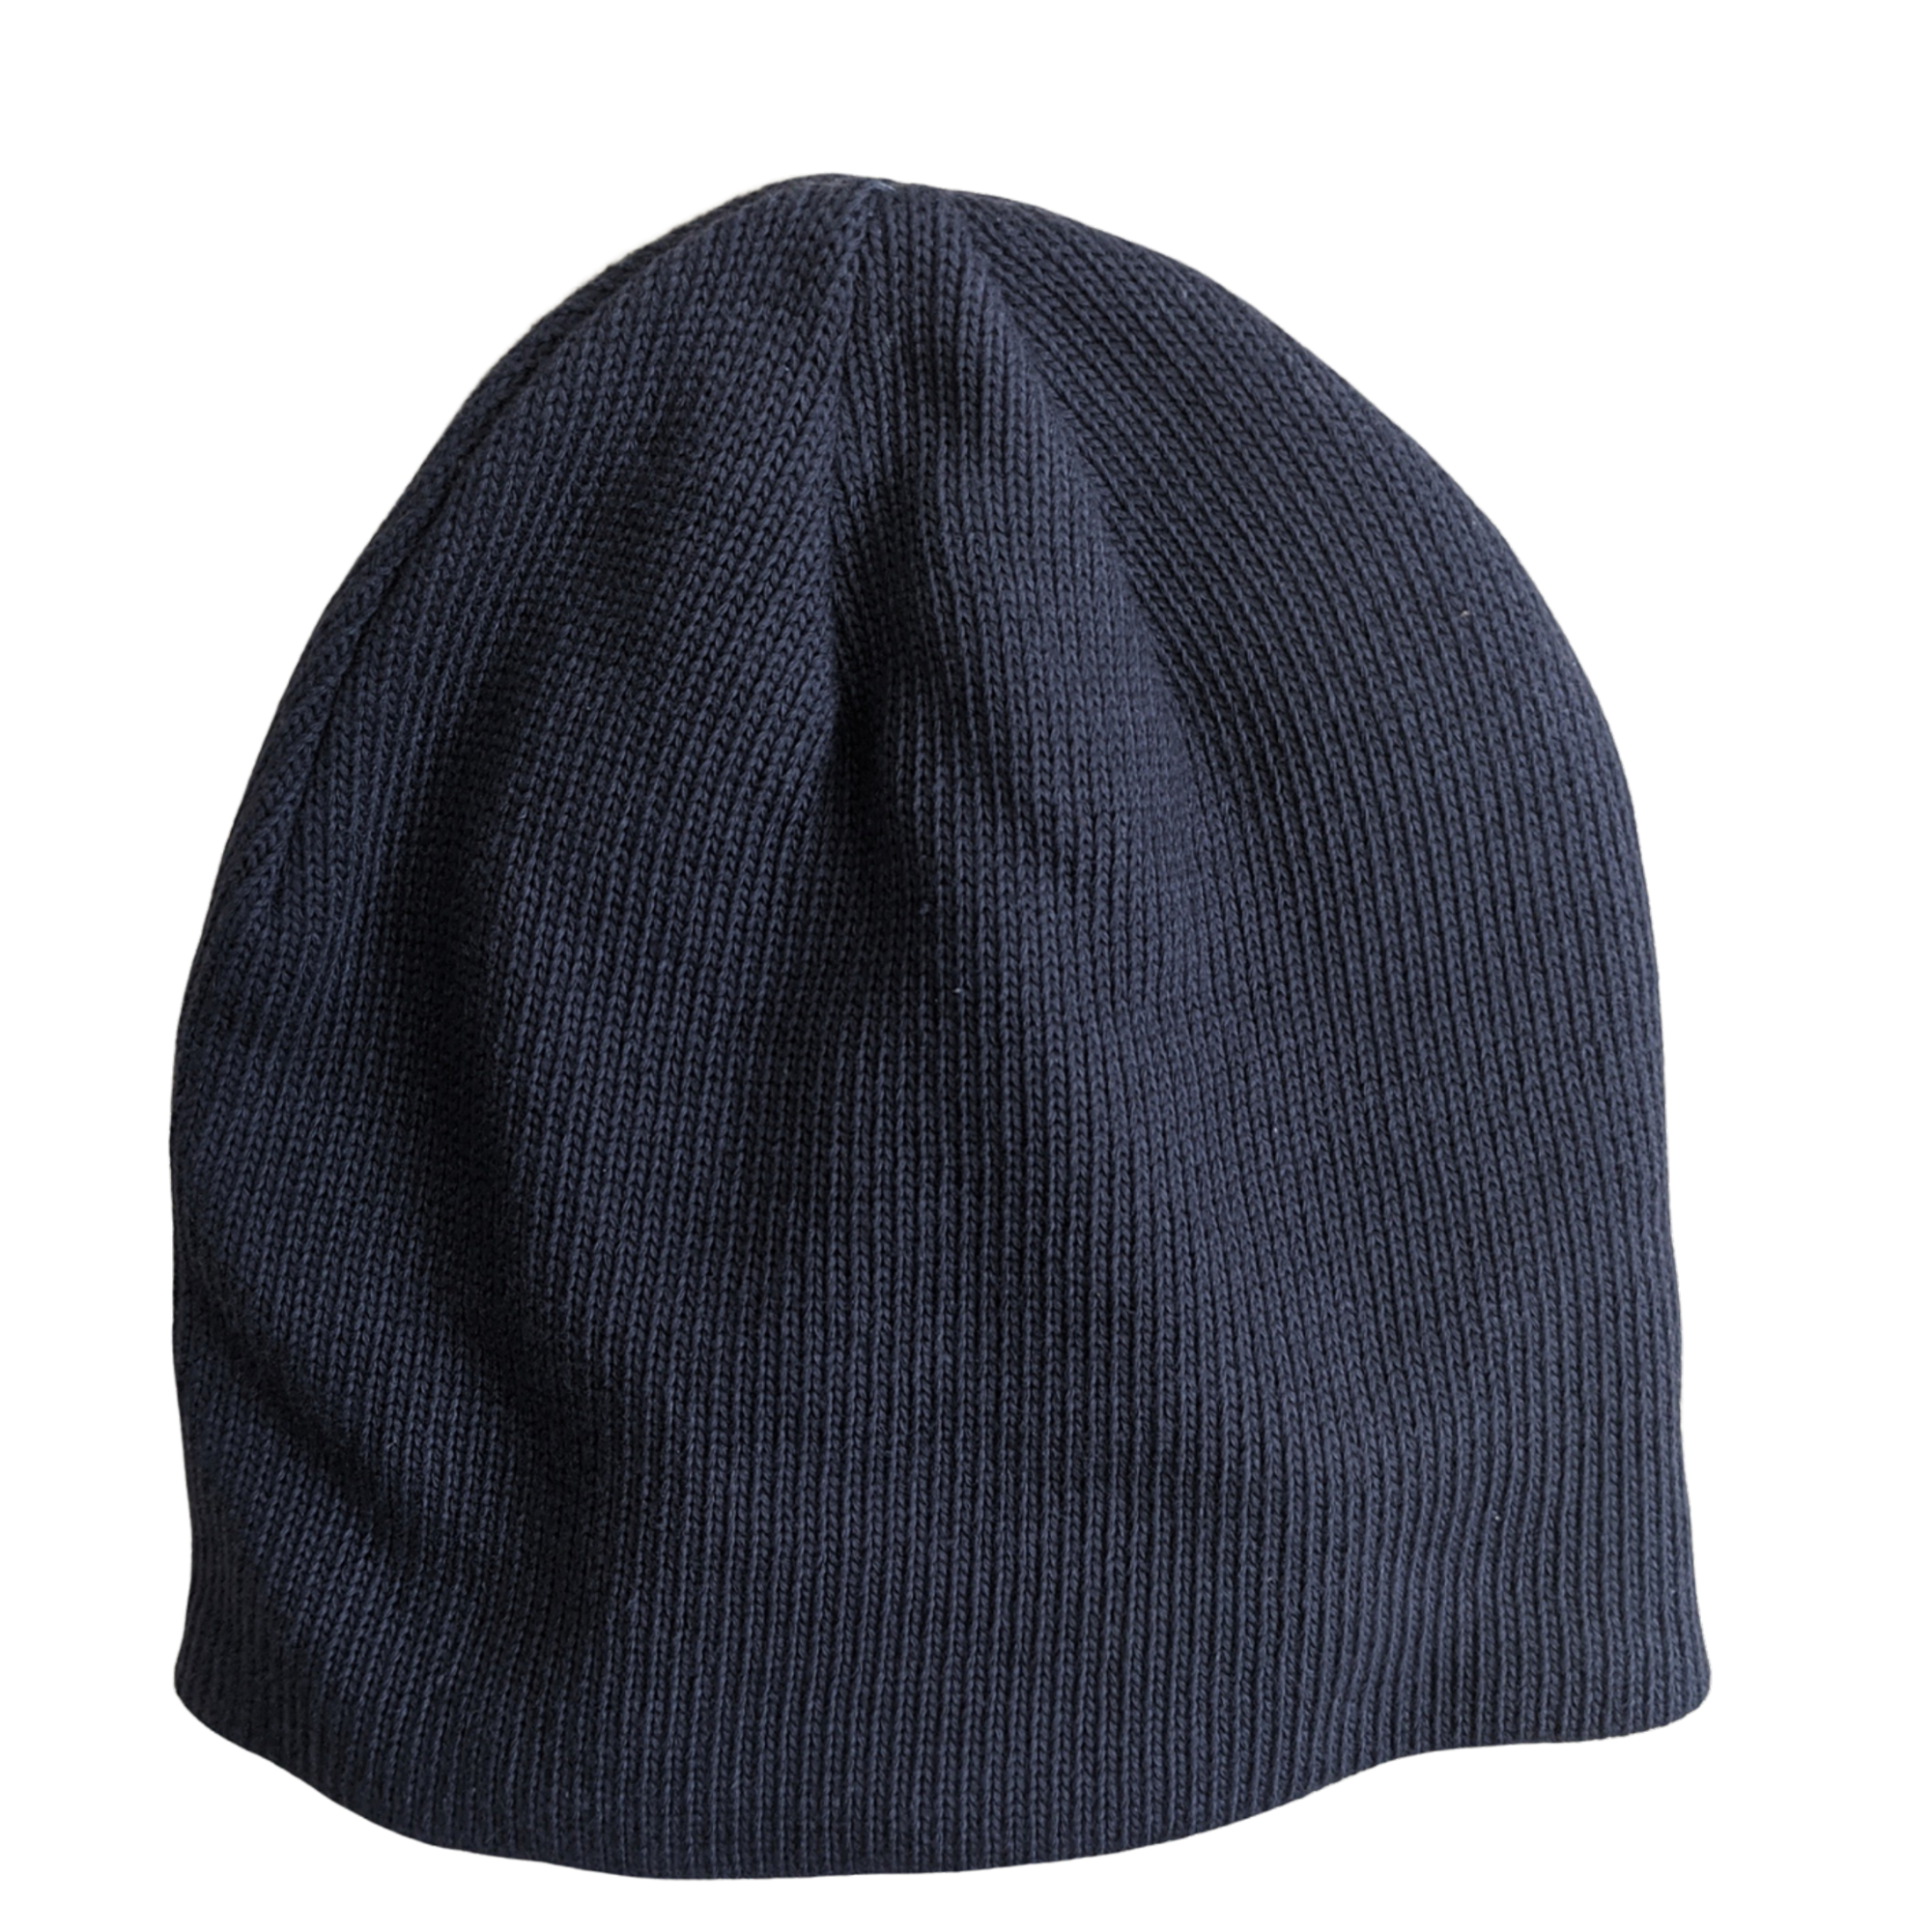 GreenHive Beanie - GreenHive Collective - ECO-FRIENDLY APPAREL